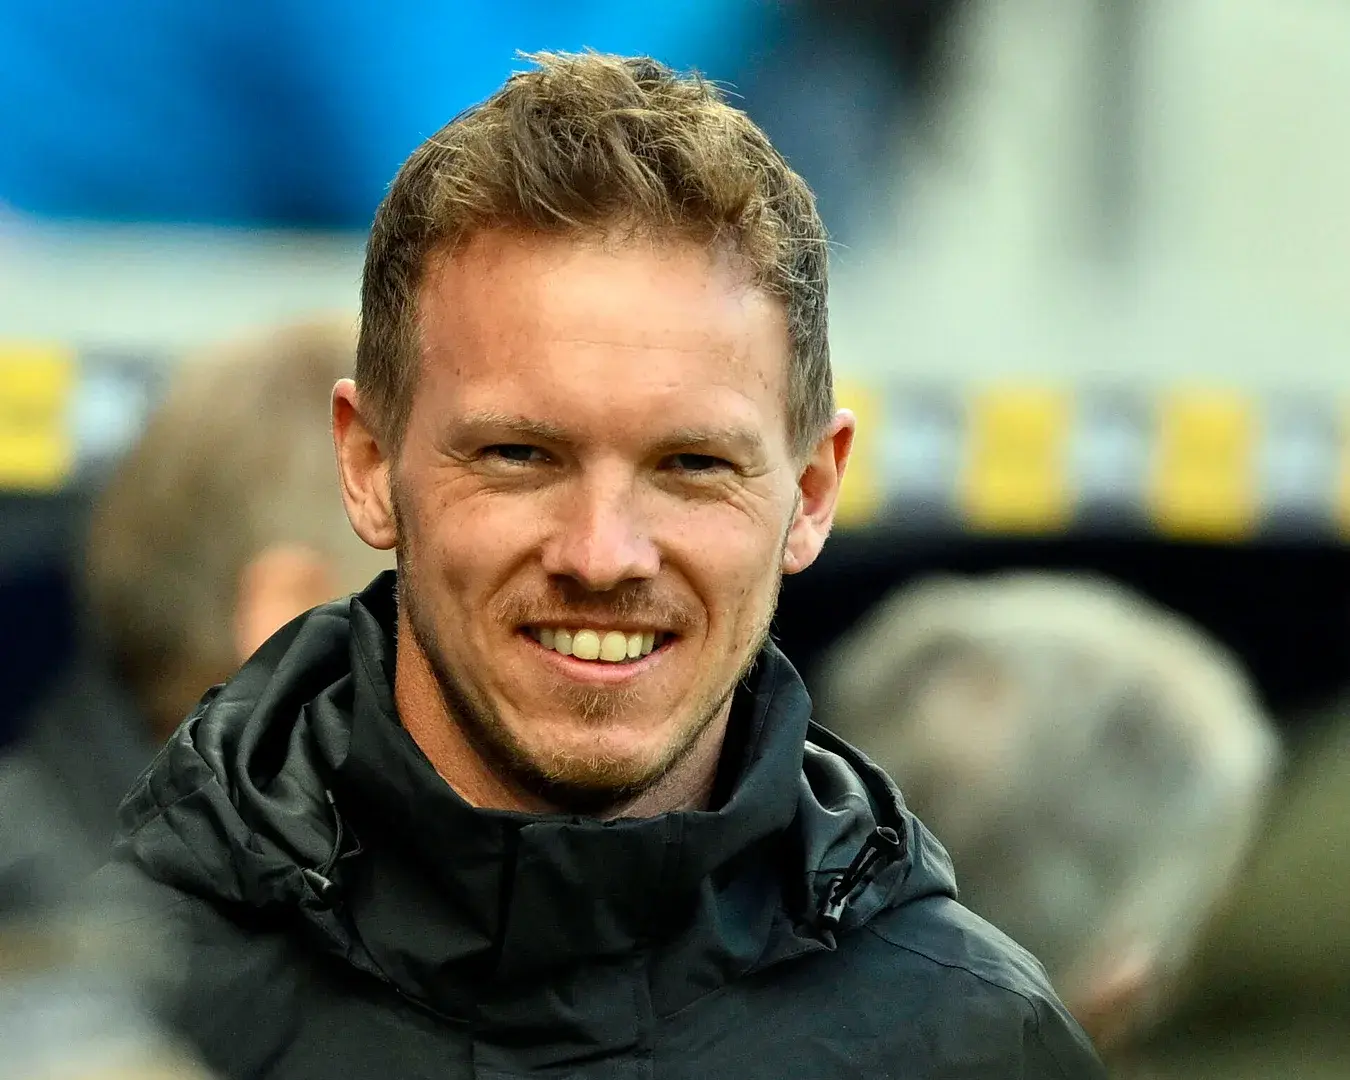 Julian Nagelsmann has signed a contract extension with the German men’s national team, the domestic football association